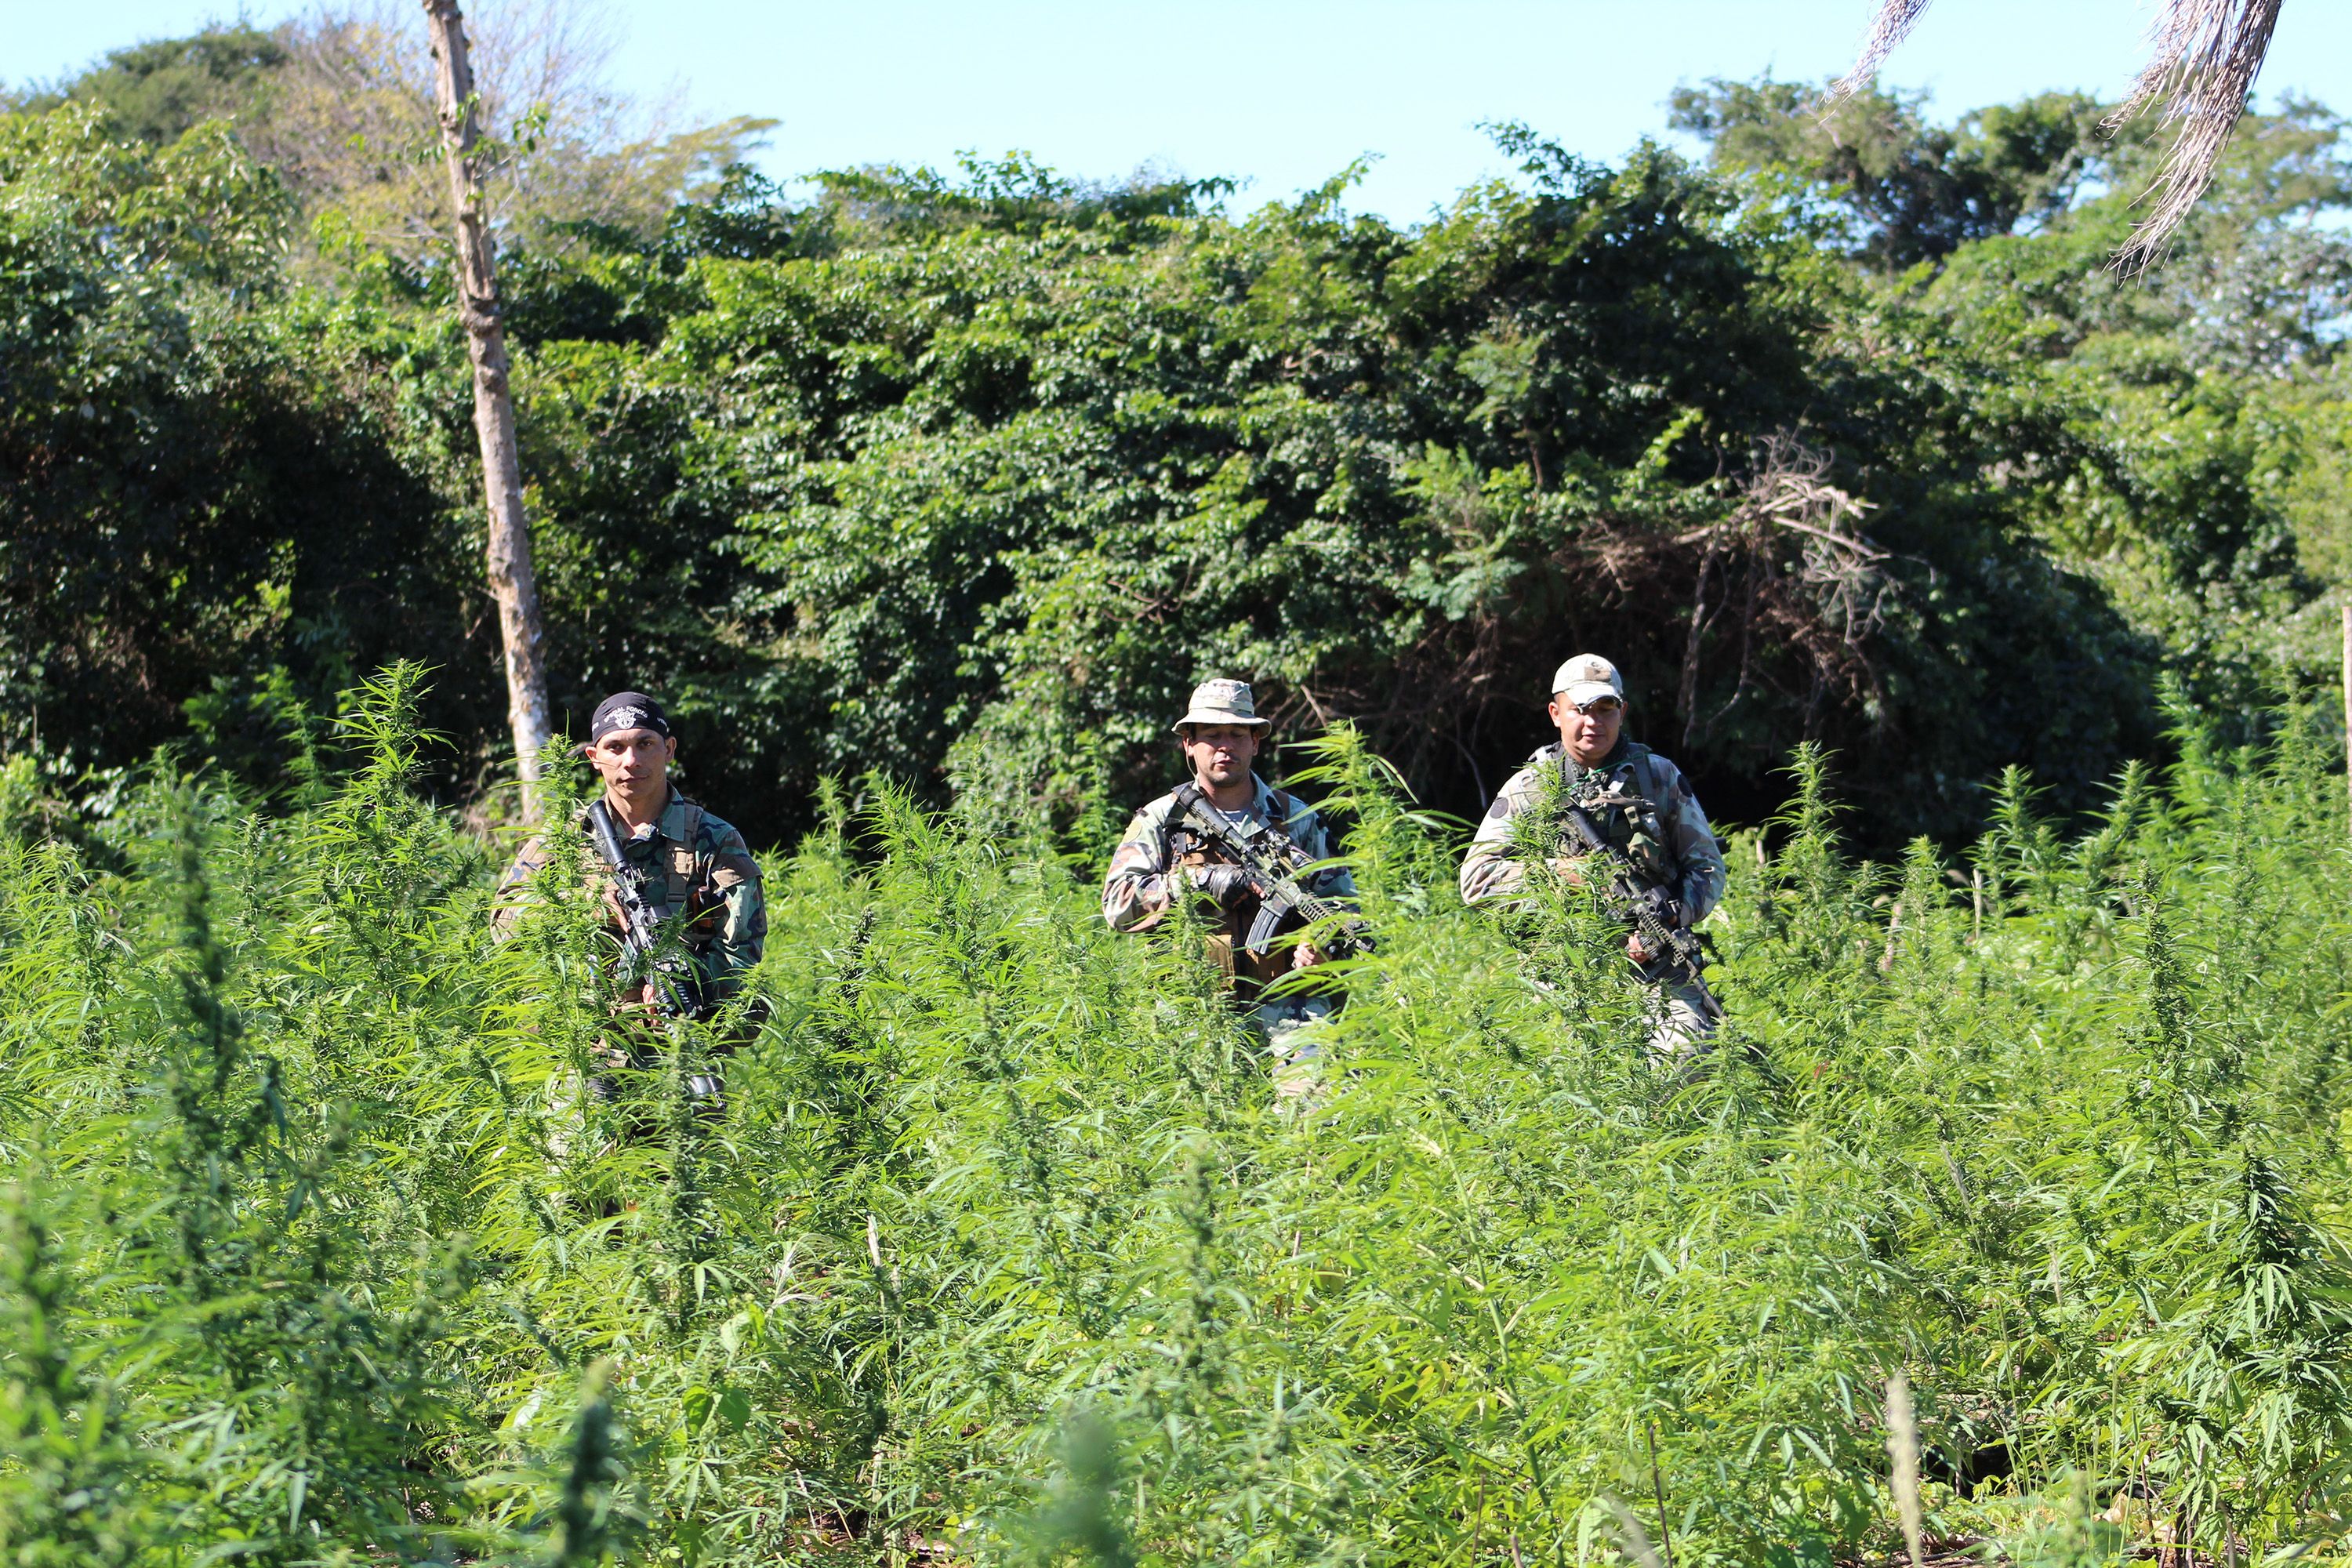 This clandestine cannabis plantation, in a private forest reserve on a huge ranch, covered around seven acres. The soldiers gave it the once over before getting to work destroying the plants. Image by Simeon Tegel. Paraguay, 2016.